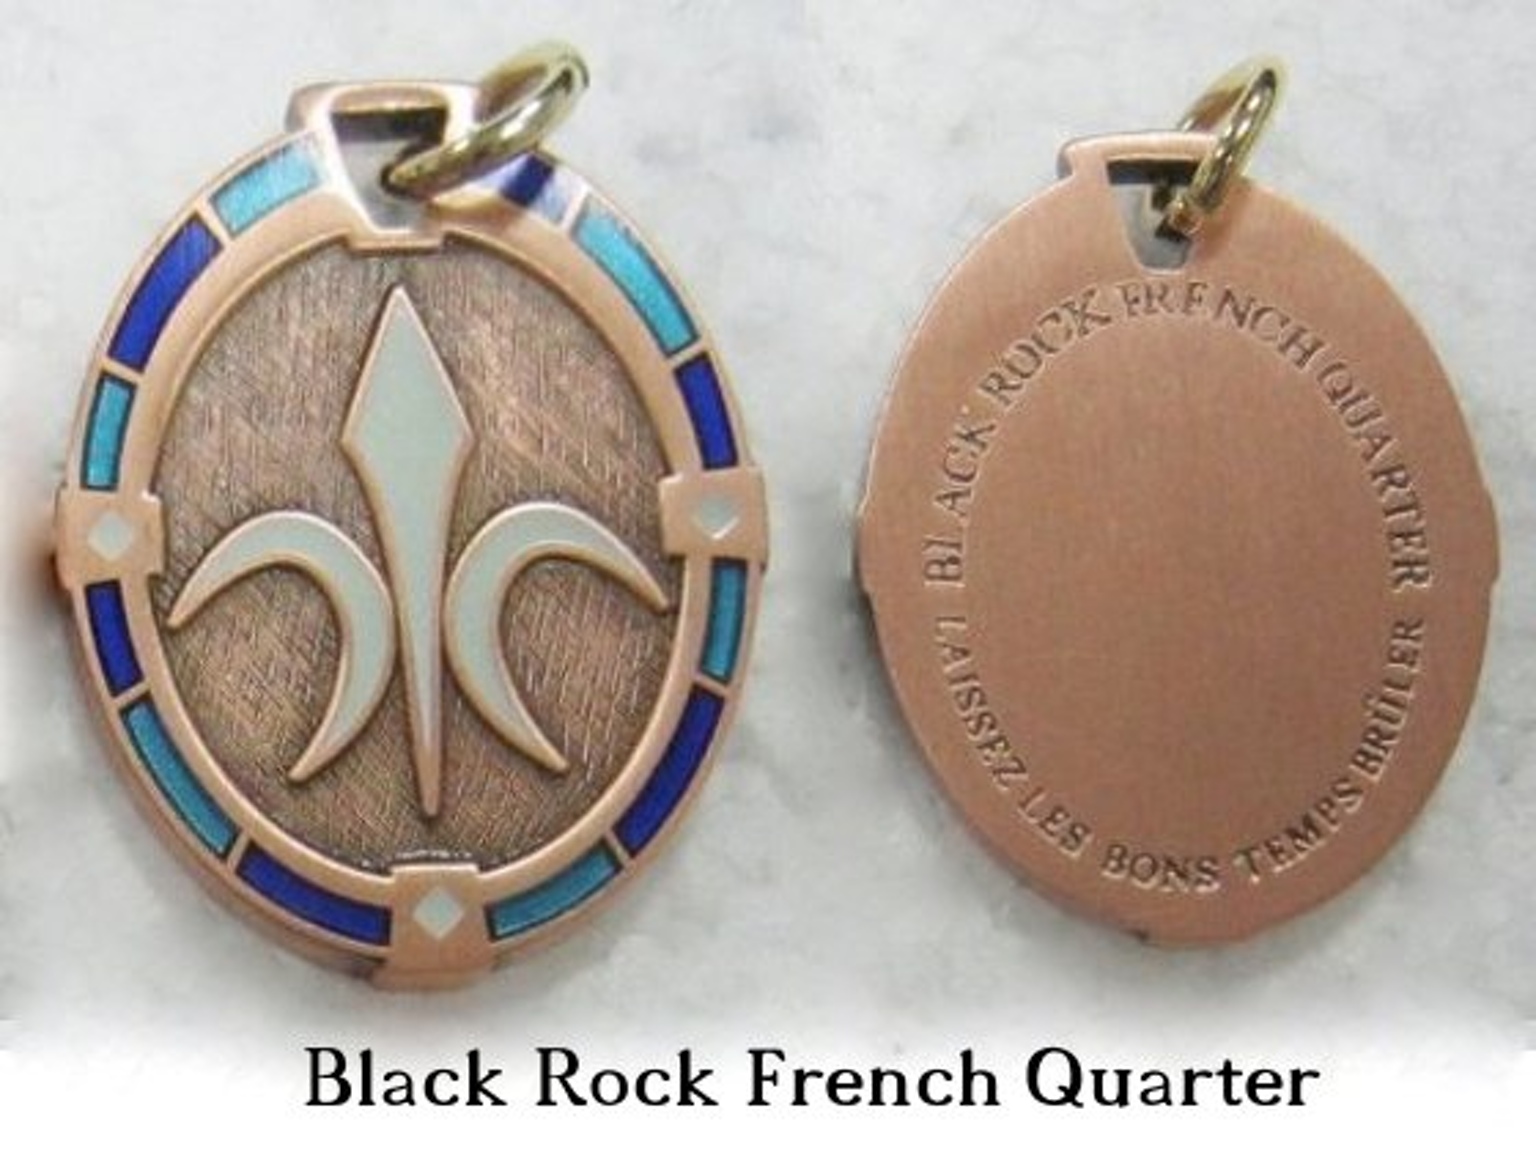 When we went to Burning Man in 2012, I gave to the Black Rock French Quarter Kickstarter and got a glow-in-the-dark fleur de lis medallion. I wear it a lot, and apparently it gets you top-shelf drinks at our new camp, Golden Cafe.